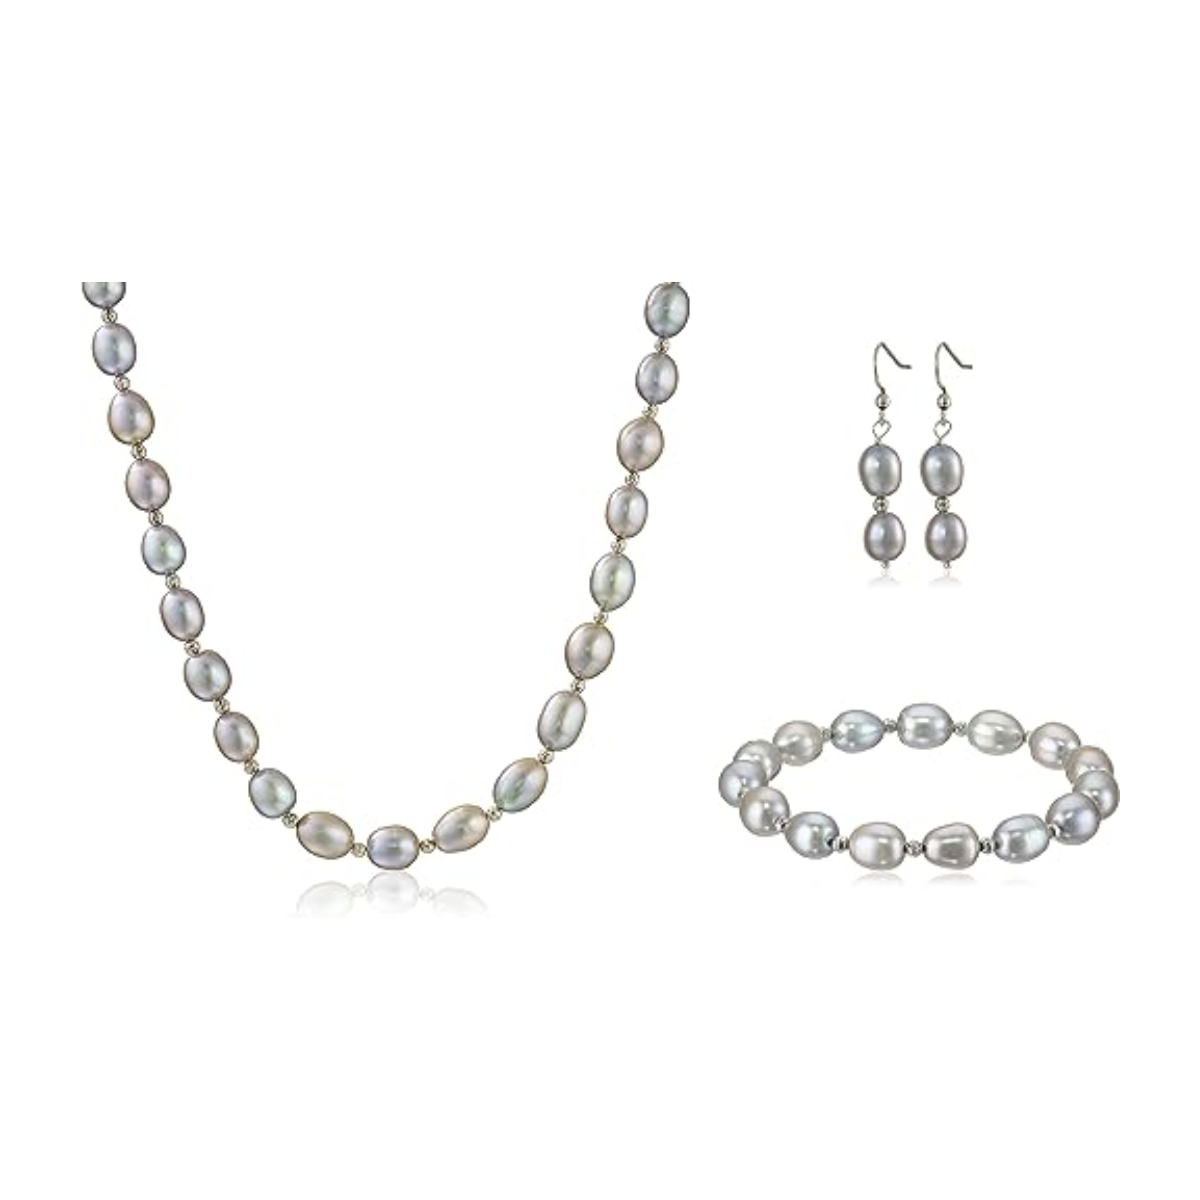 24. Timeless Elegance: Celebrate 7 Years with a Stunning Pearl Jewelry Set